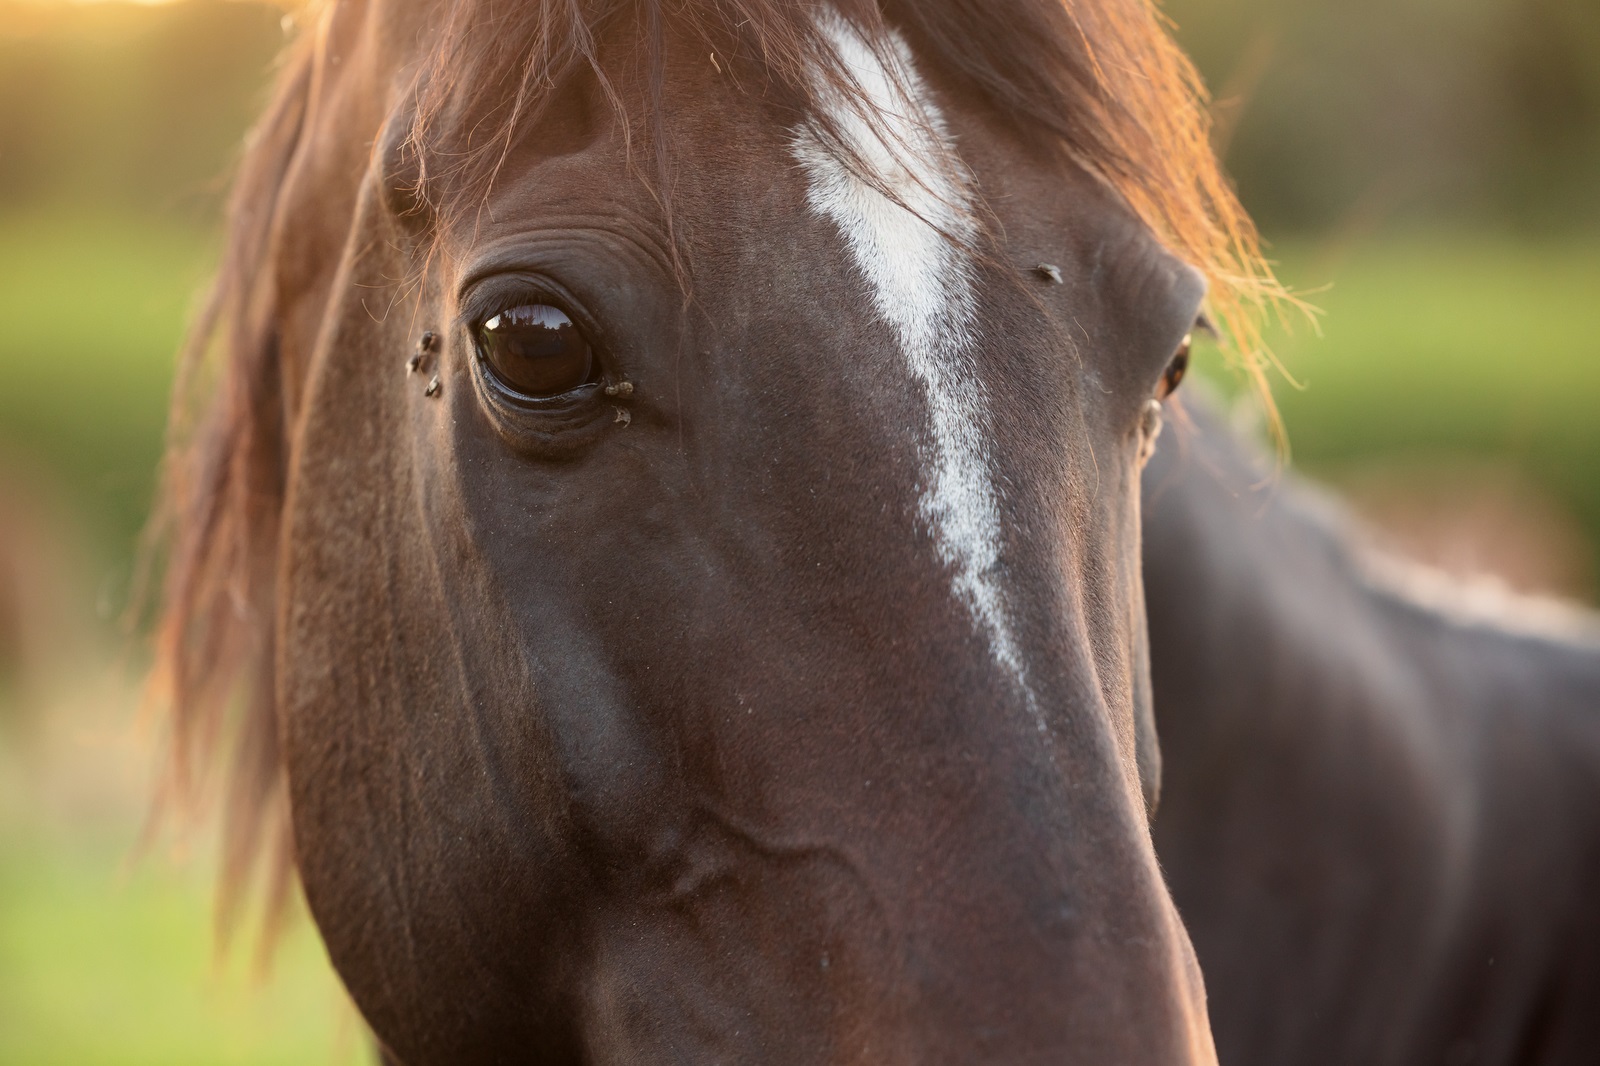 flies feed on facial secretions around the nose and mouth of a horse